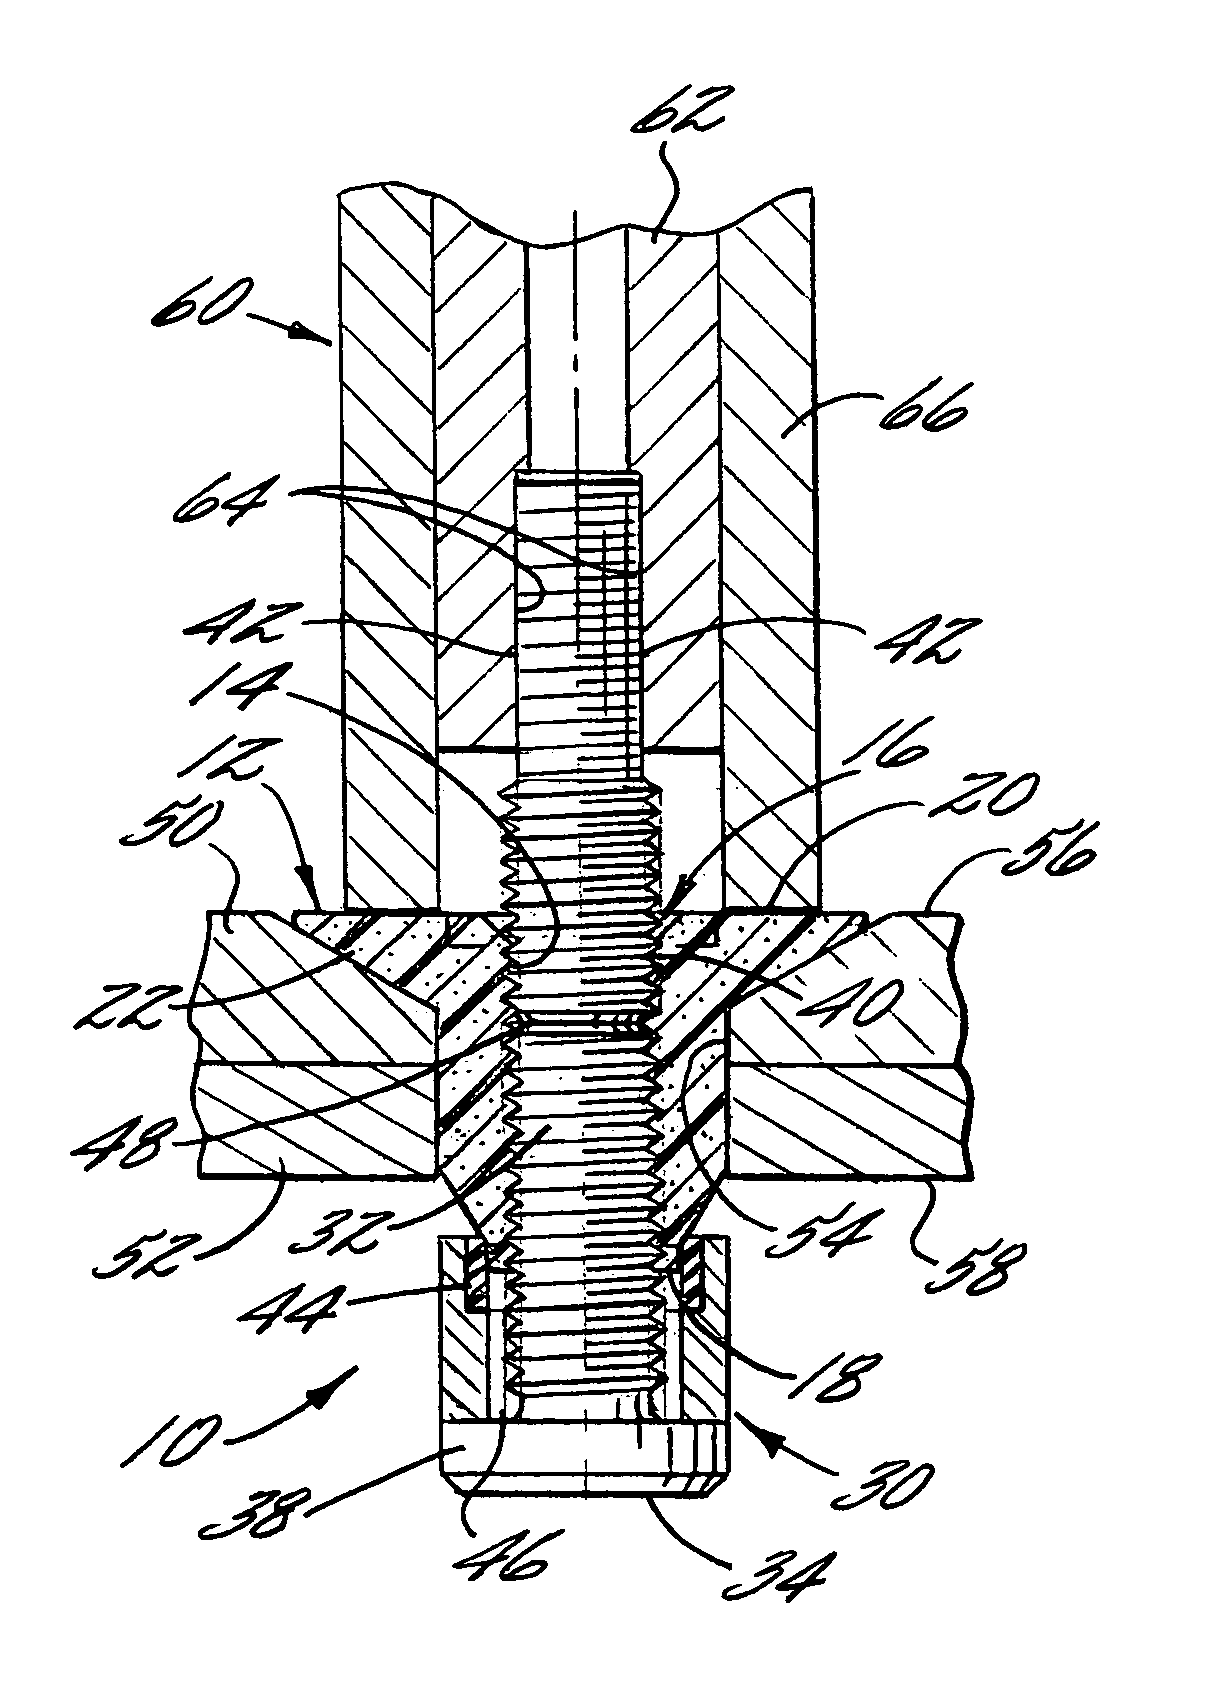 Hybrid fastener apparatus and method for fastening